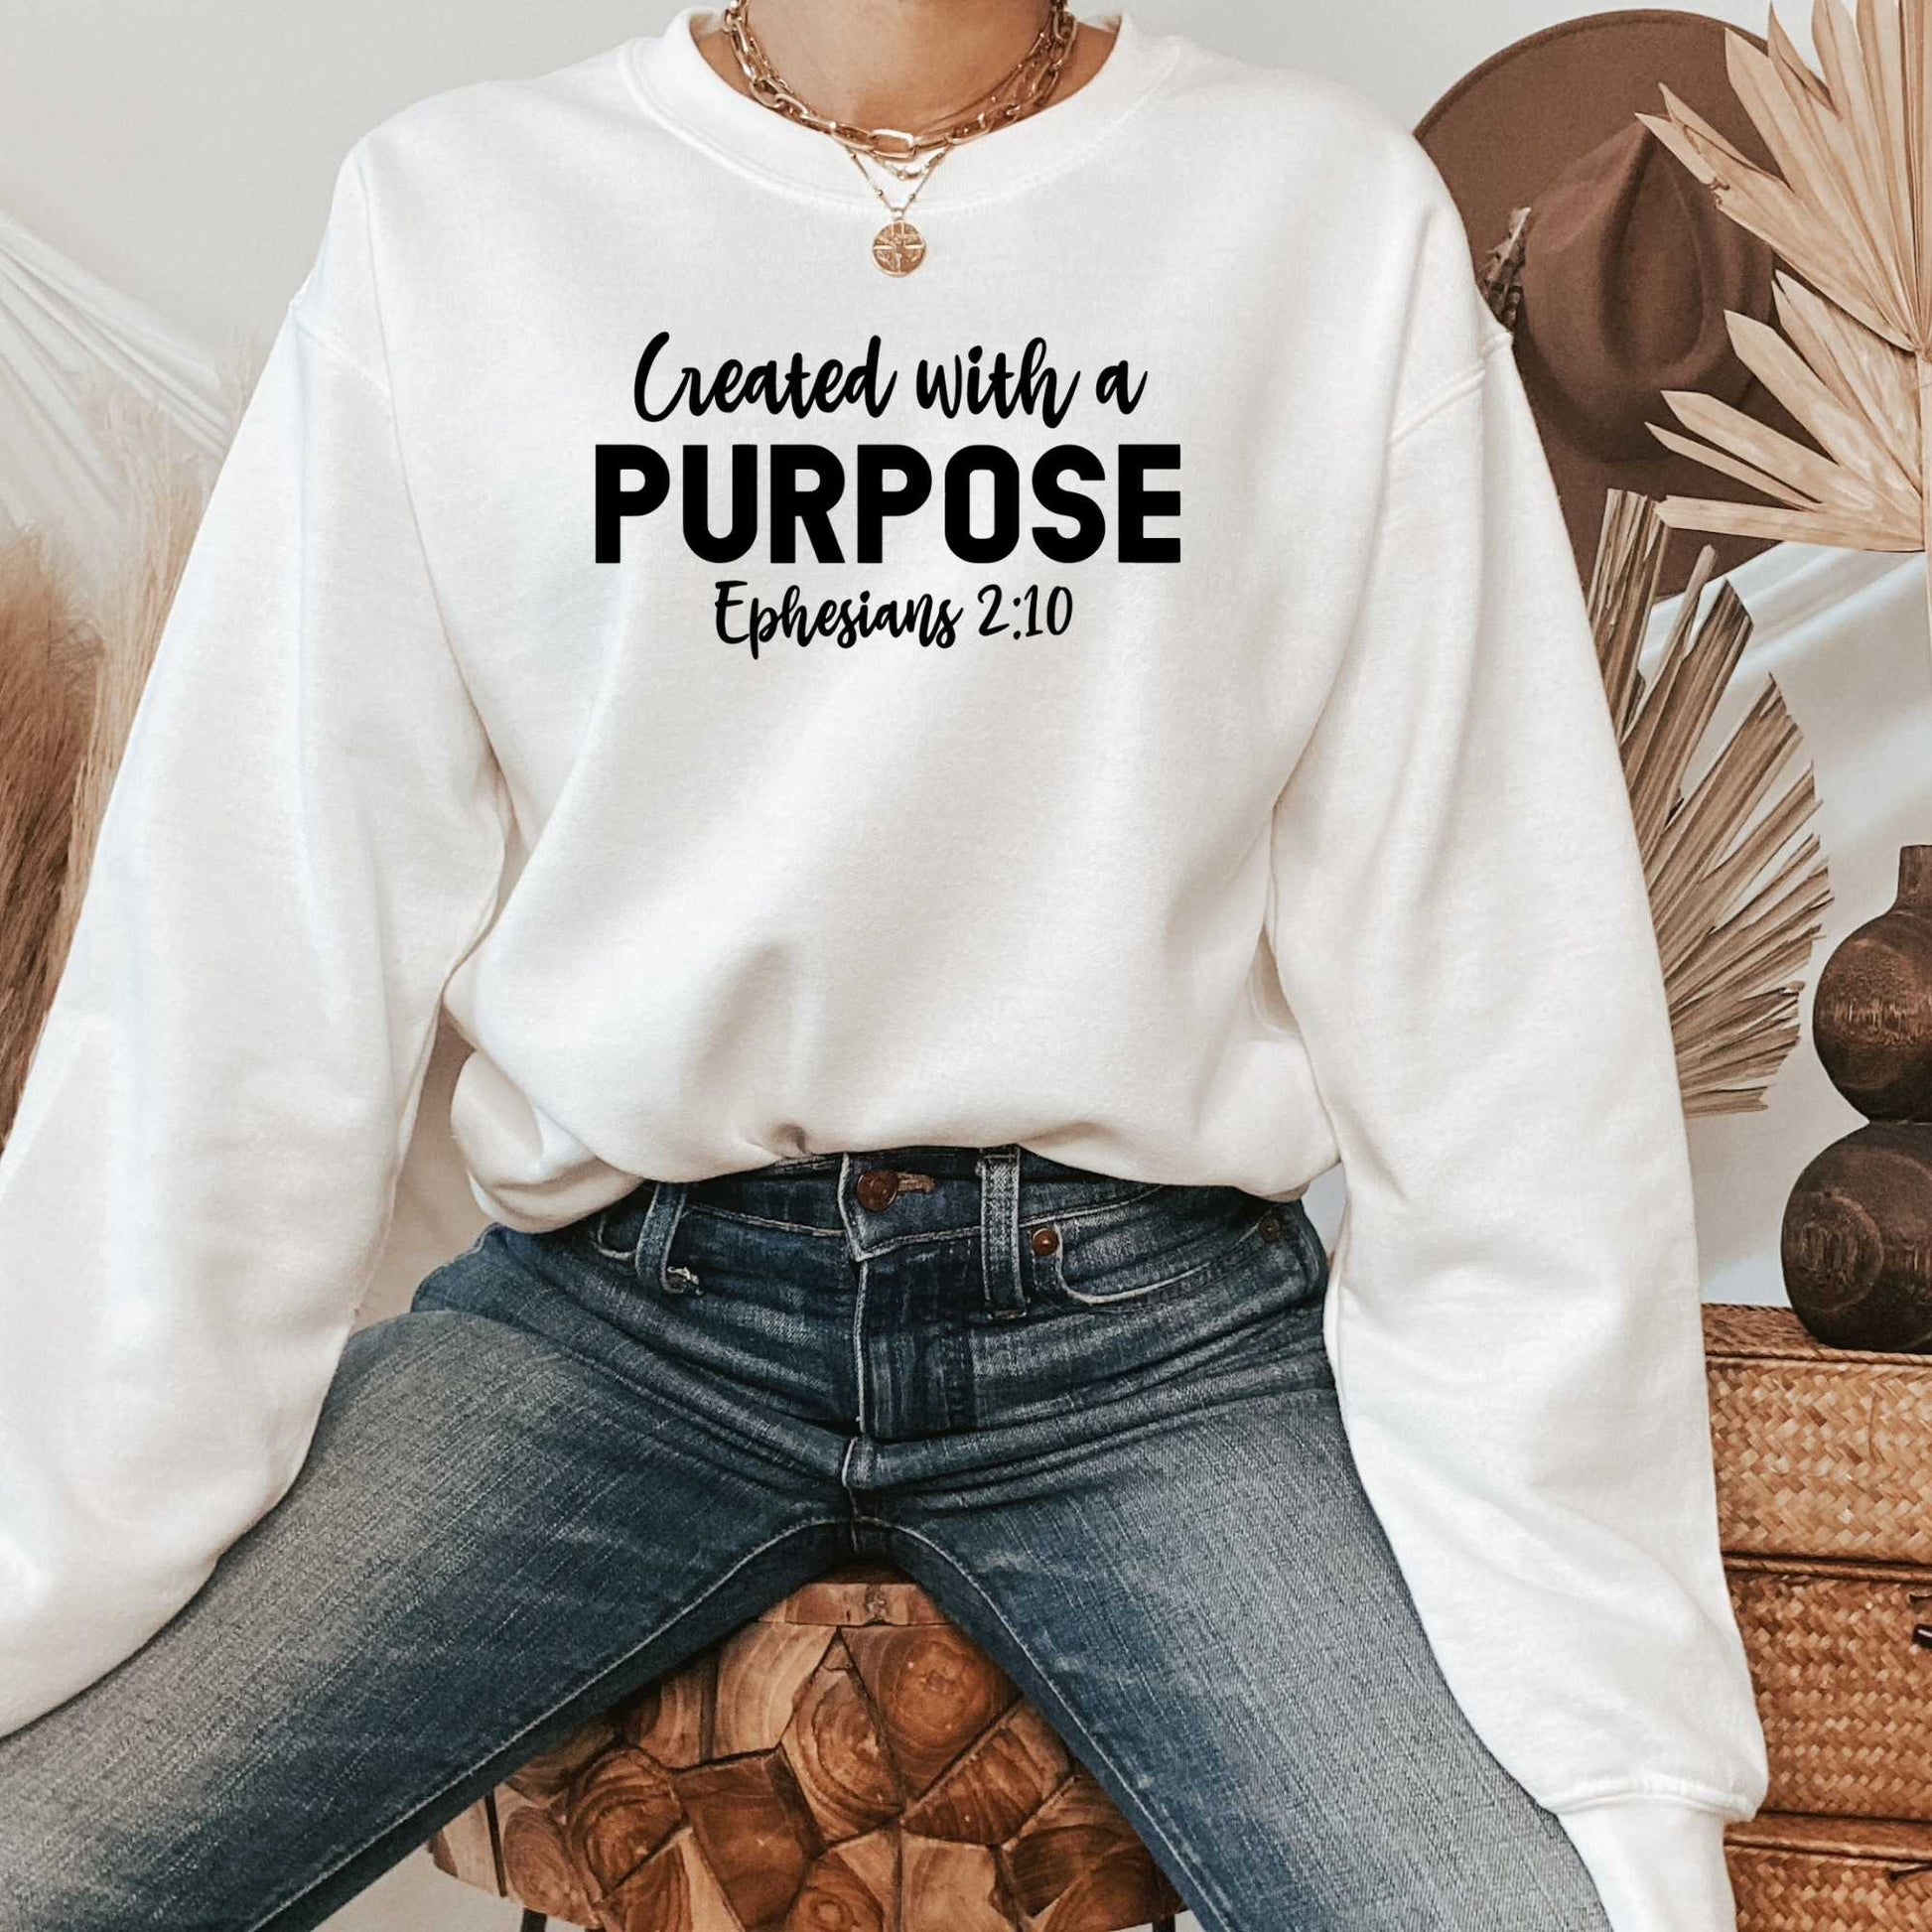 Created with a Purpose, Bible Verses Christian Shirt